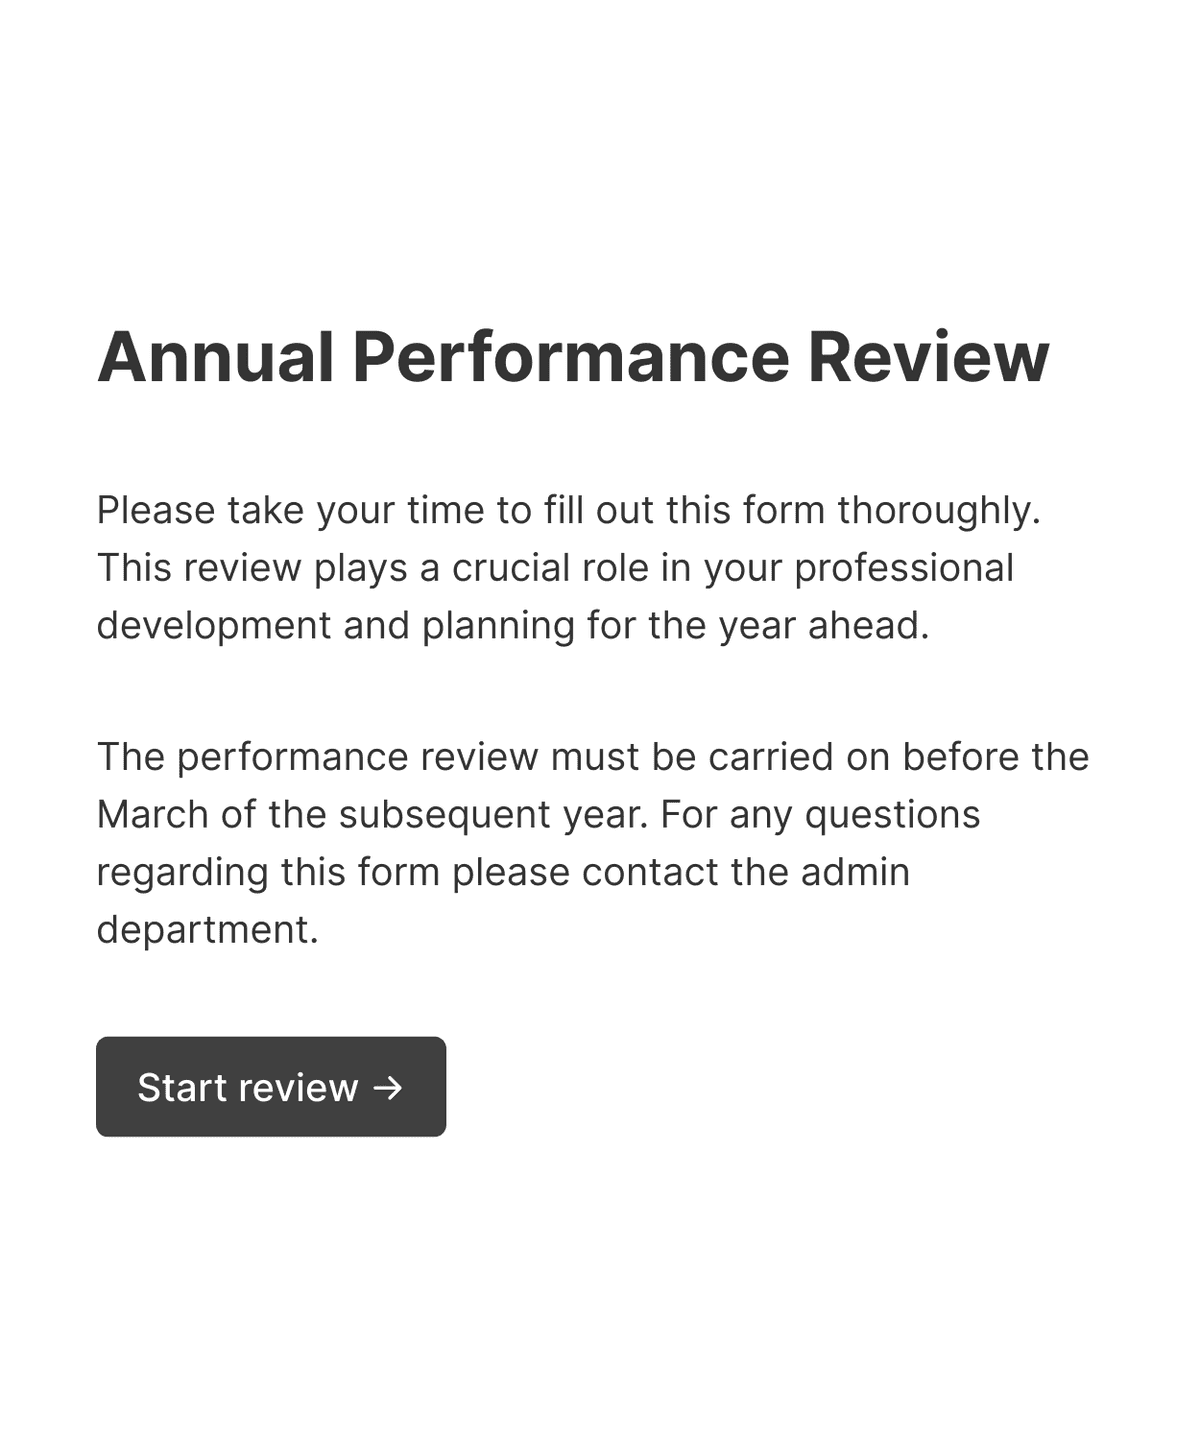 Welcome step of 'Annual employee performance review' with introduction text, and a 'Start review' button